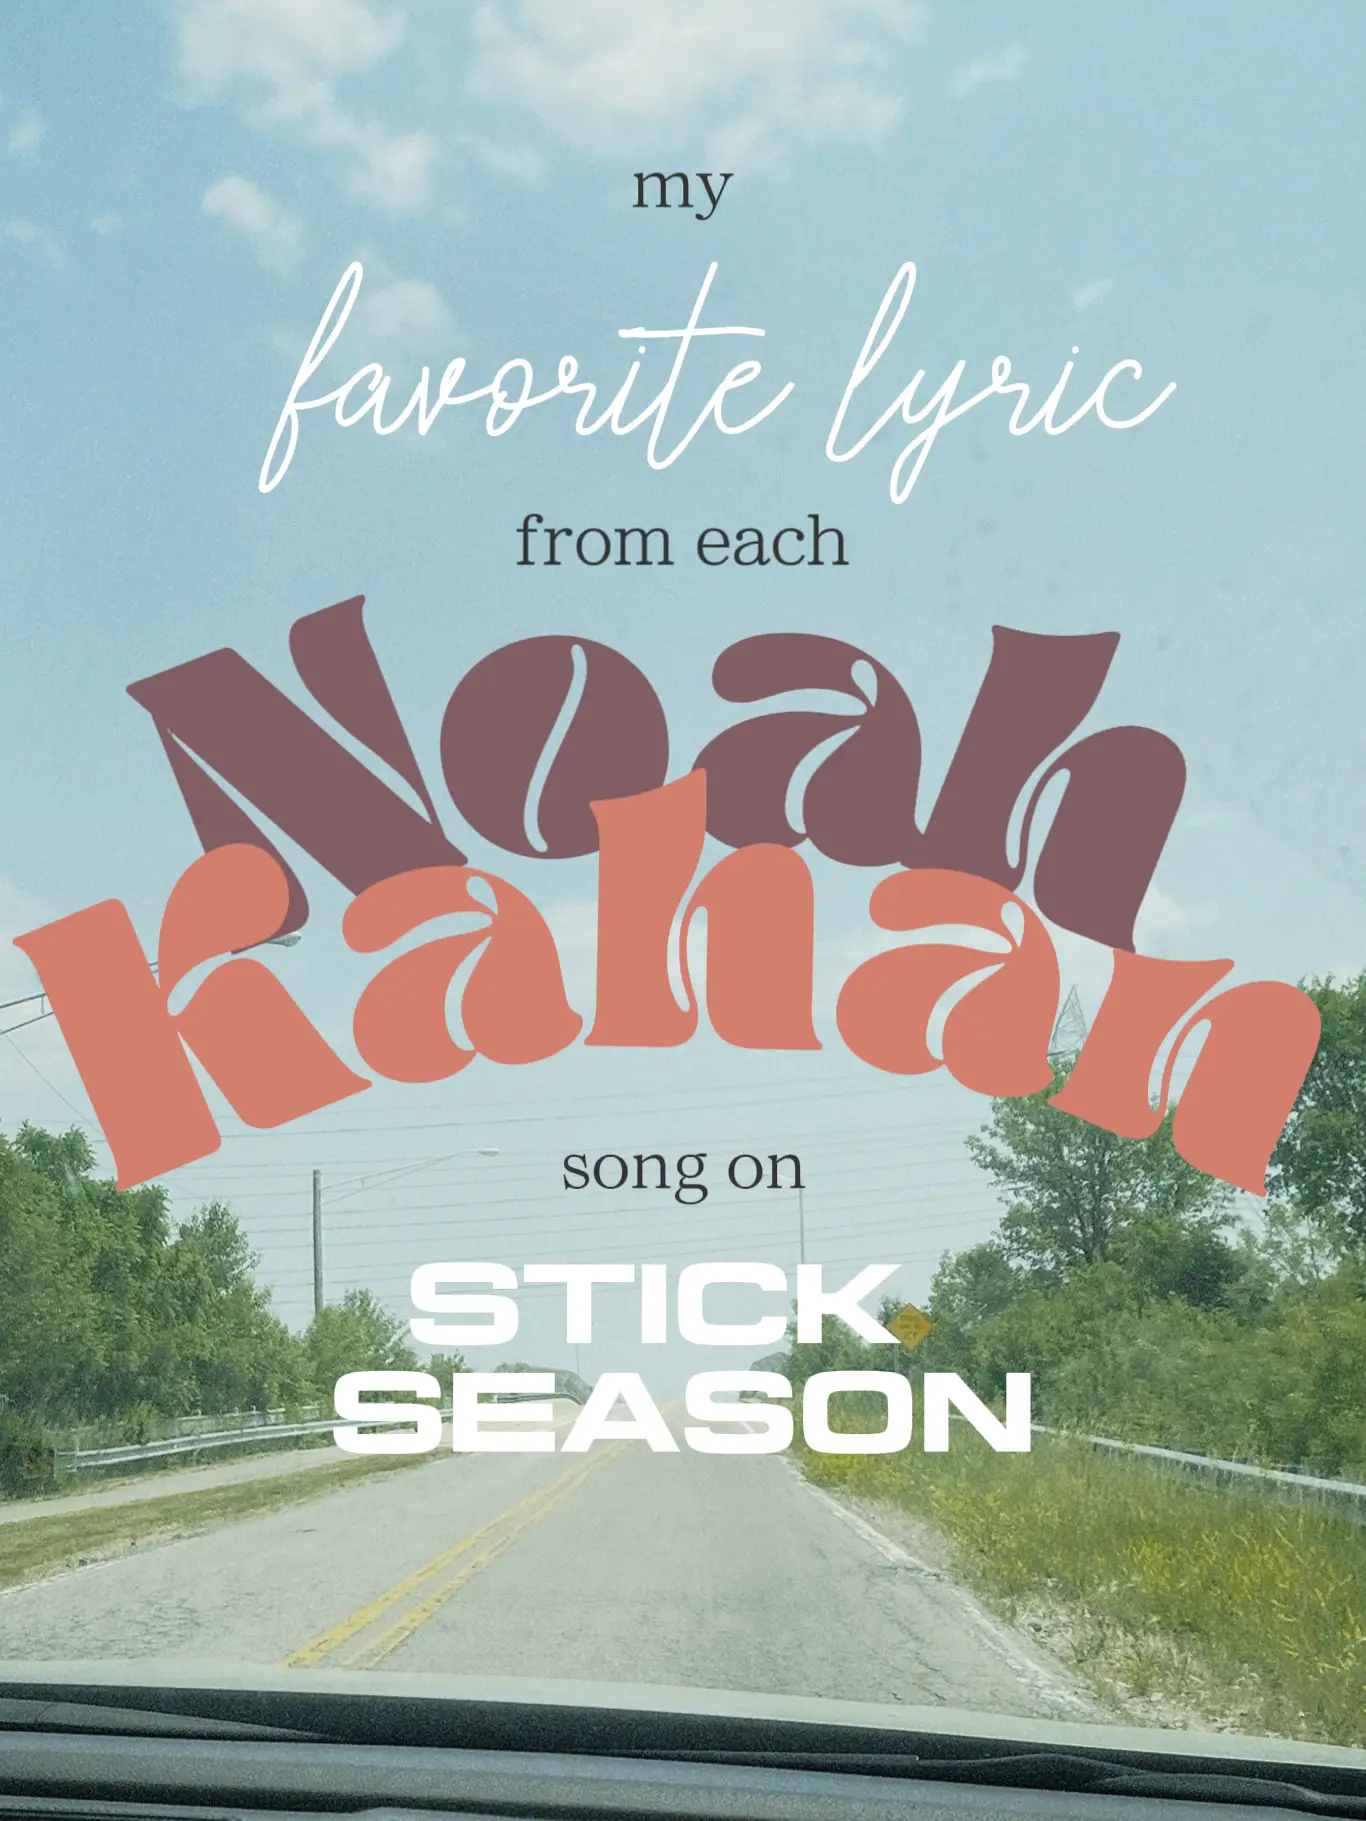 Let's look at the vinyl for Noah Kahan's Stick Season and give